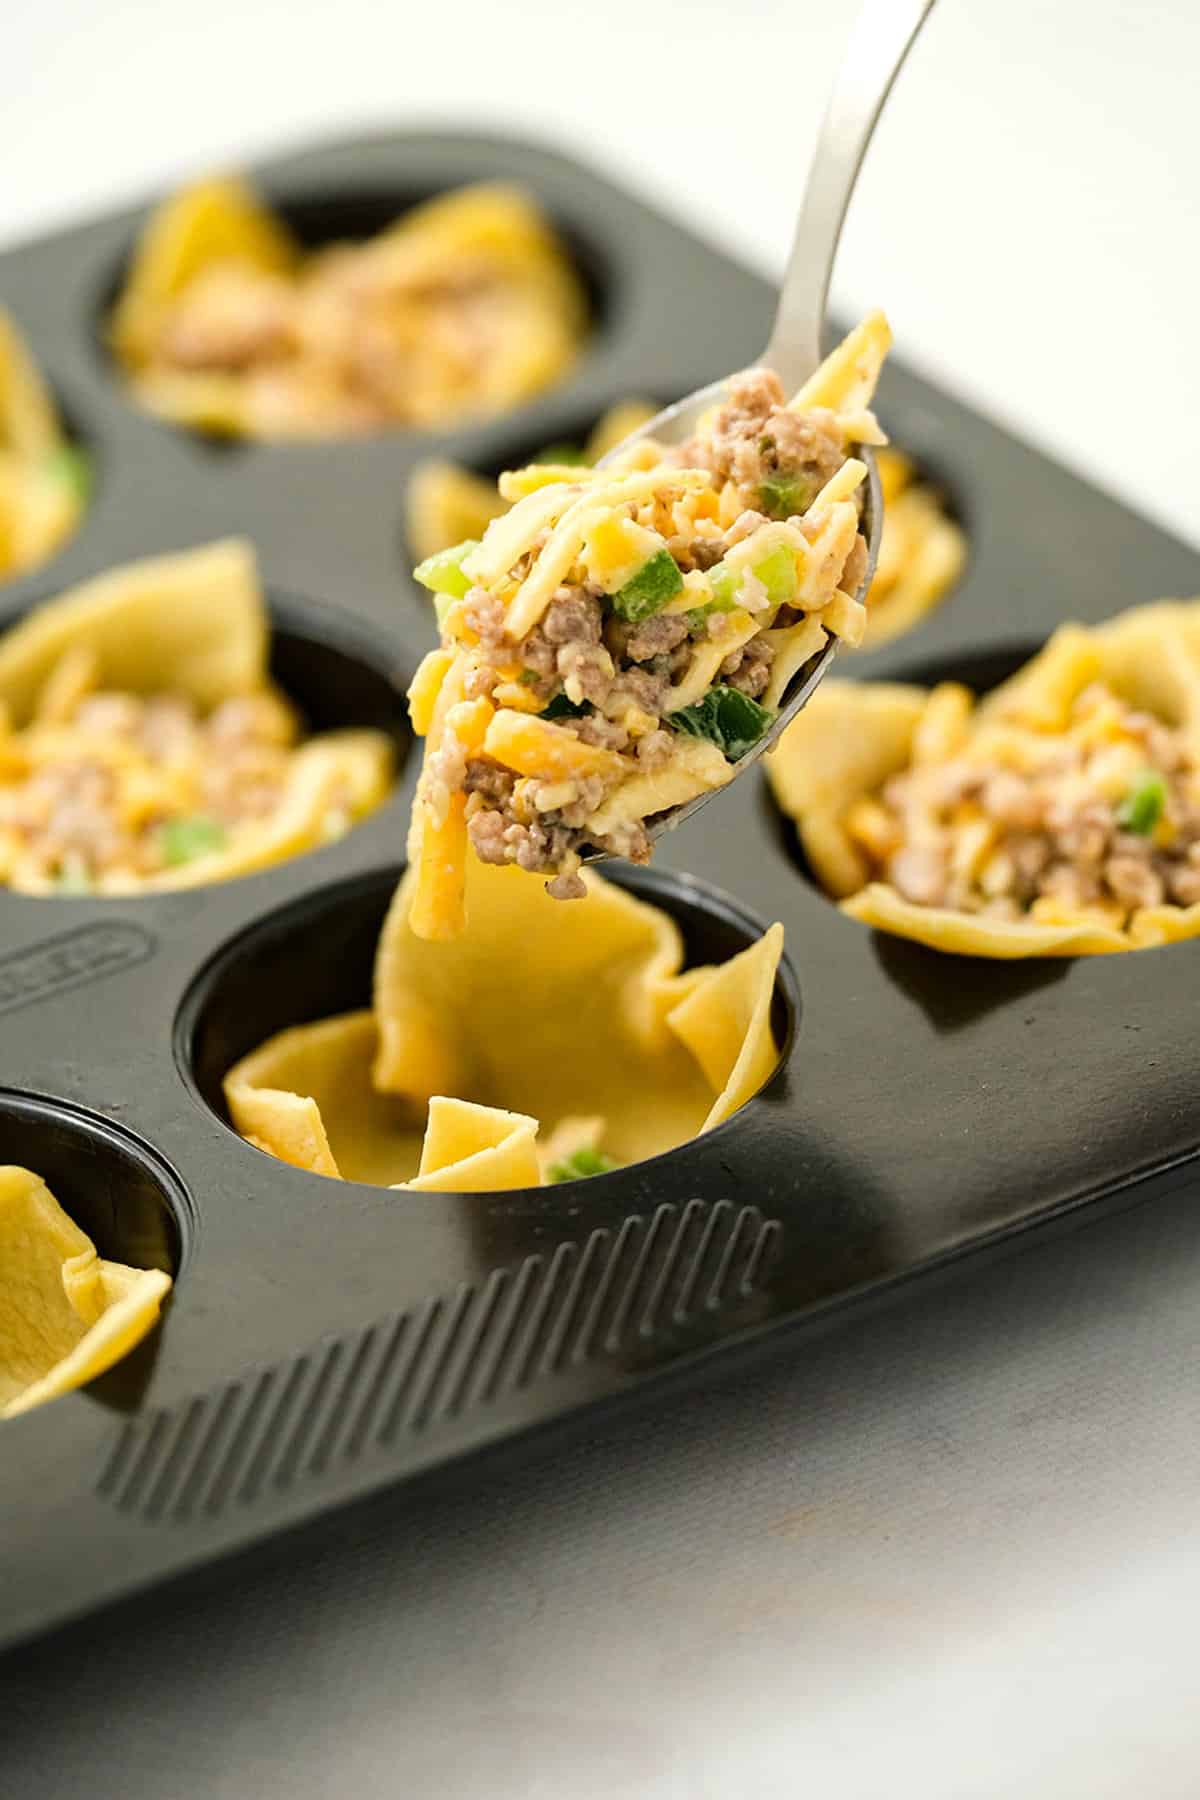 Scooping Sausage Wonton Ingredients into Assembled Wrappers in Muffin Tins